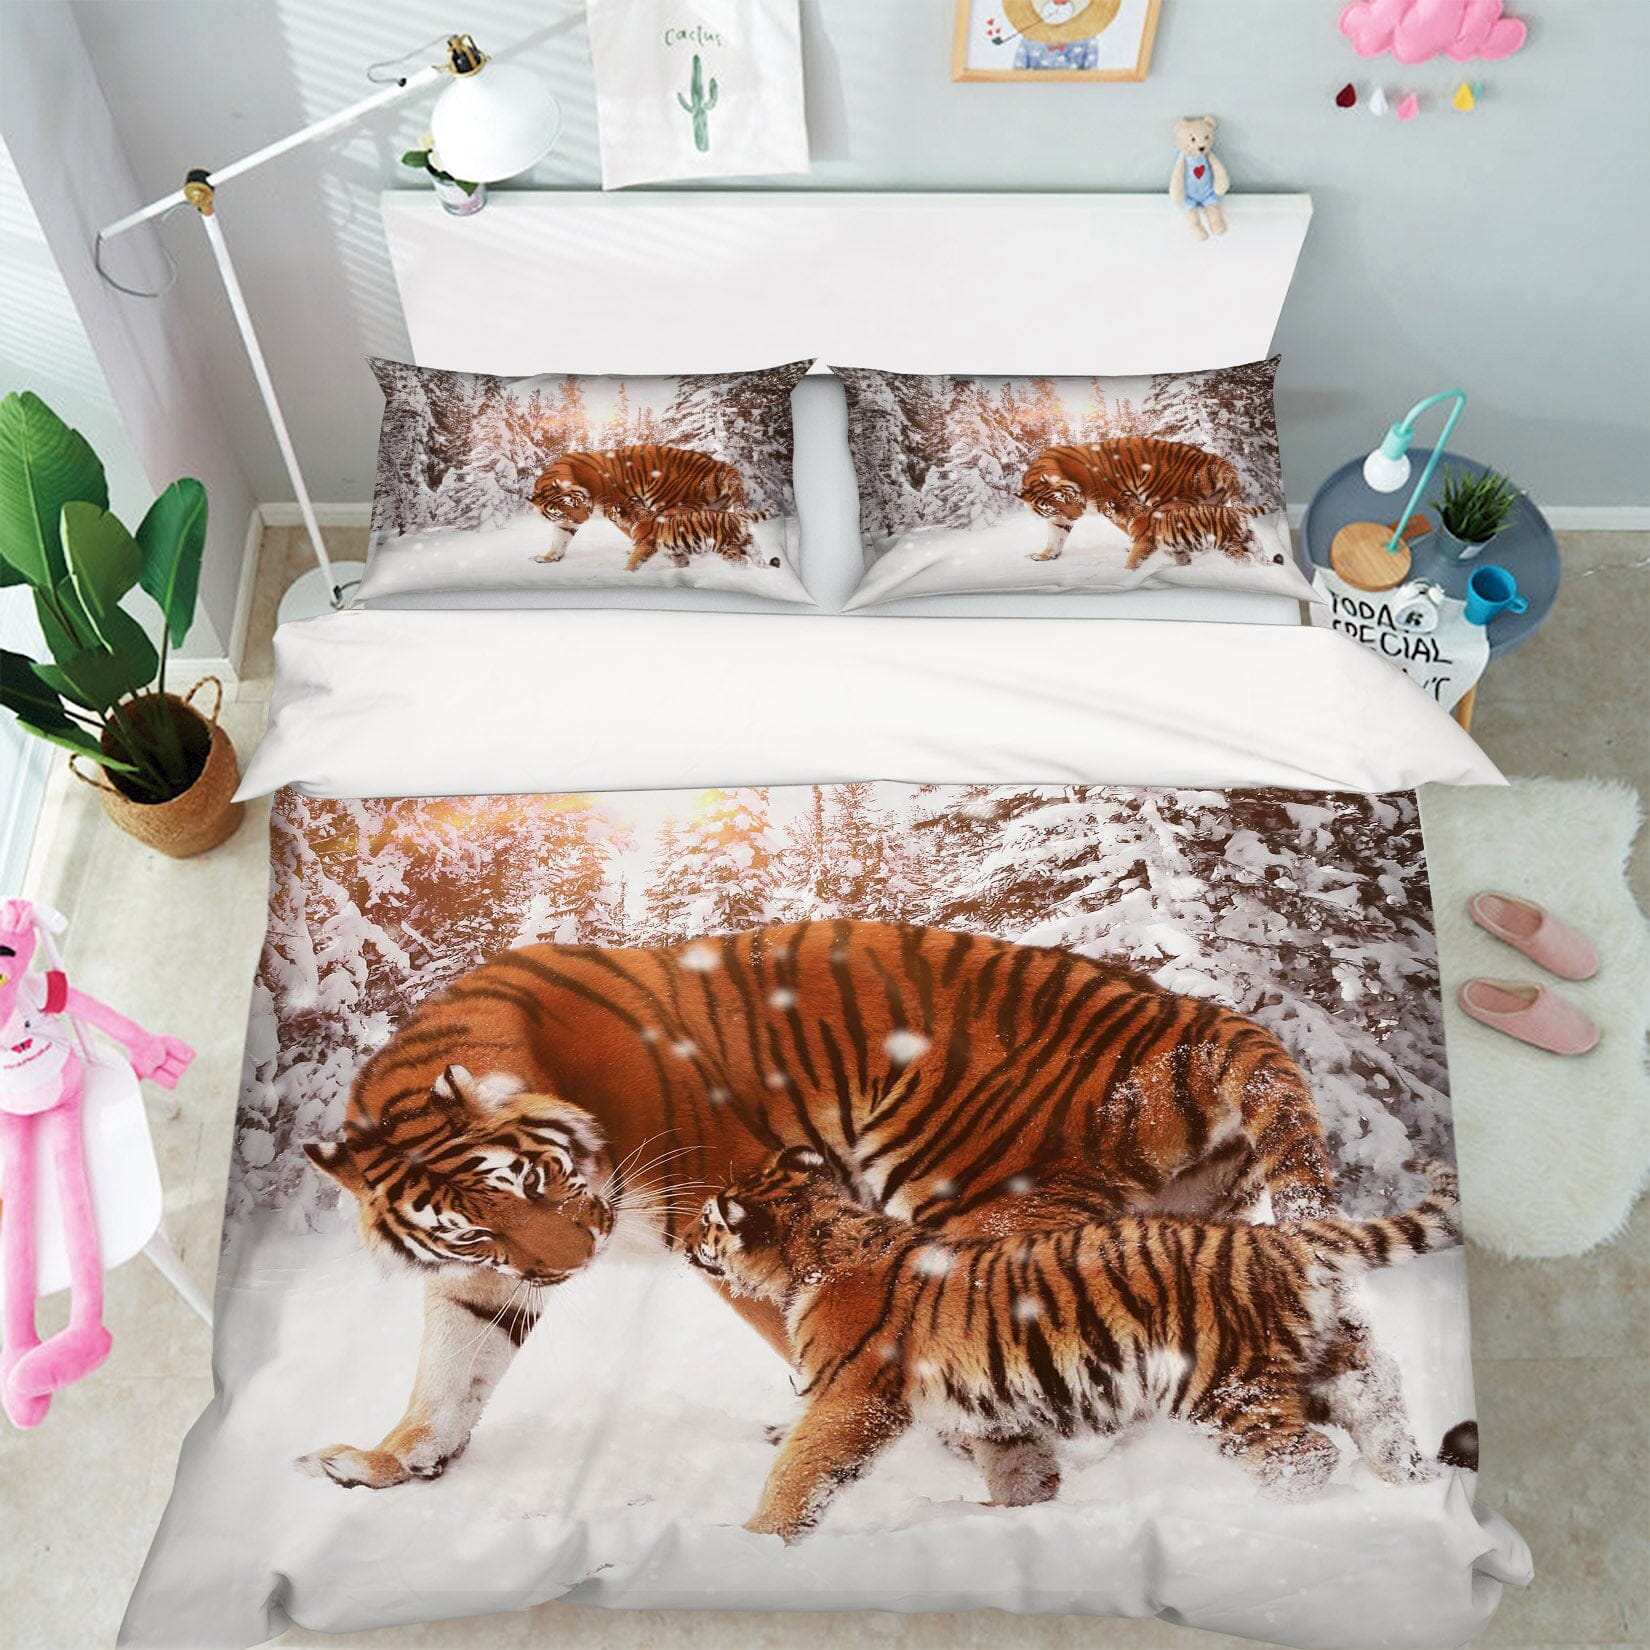 3D Snow Tiger 1950 Bed Pillowcases Quilt Quiet Covers AJ Creativity Home 